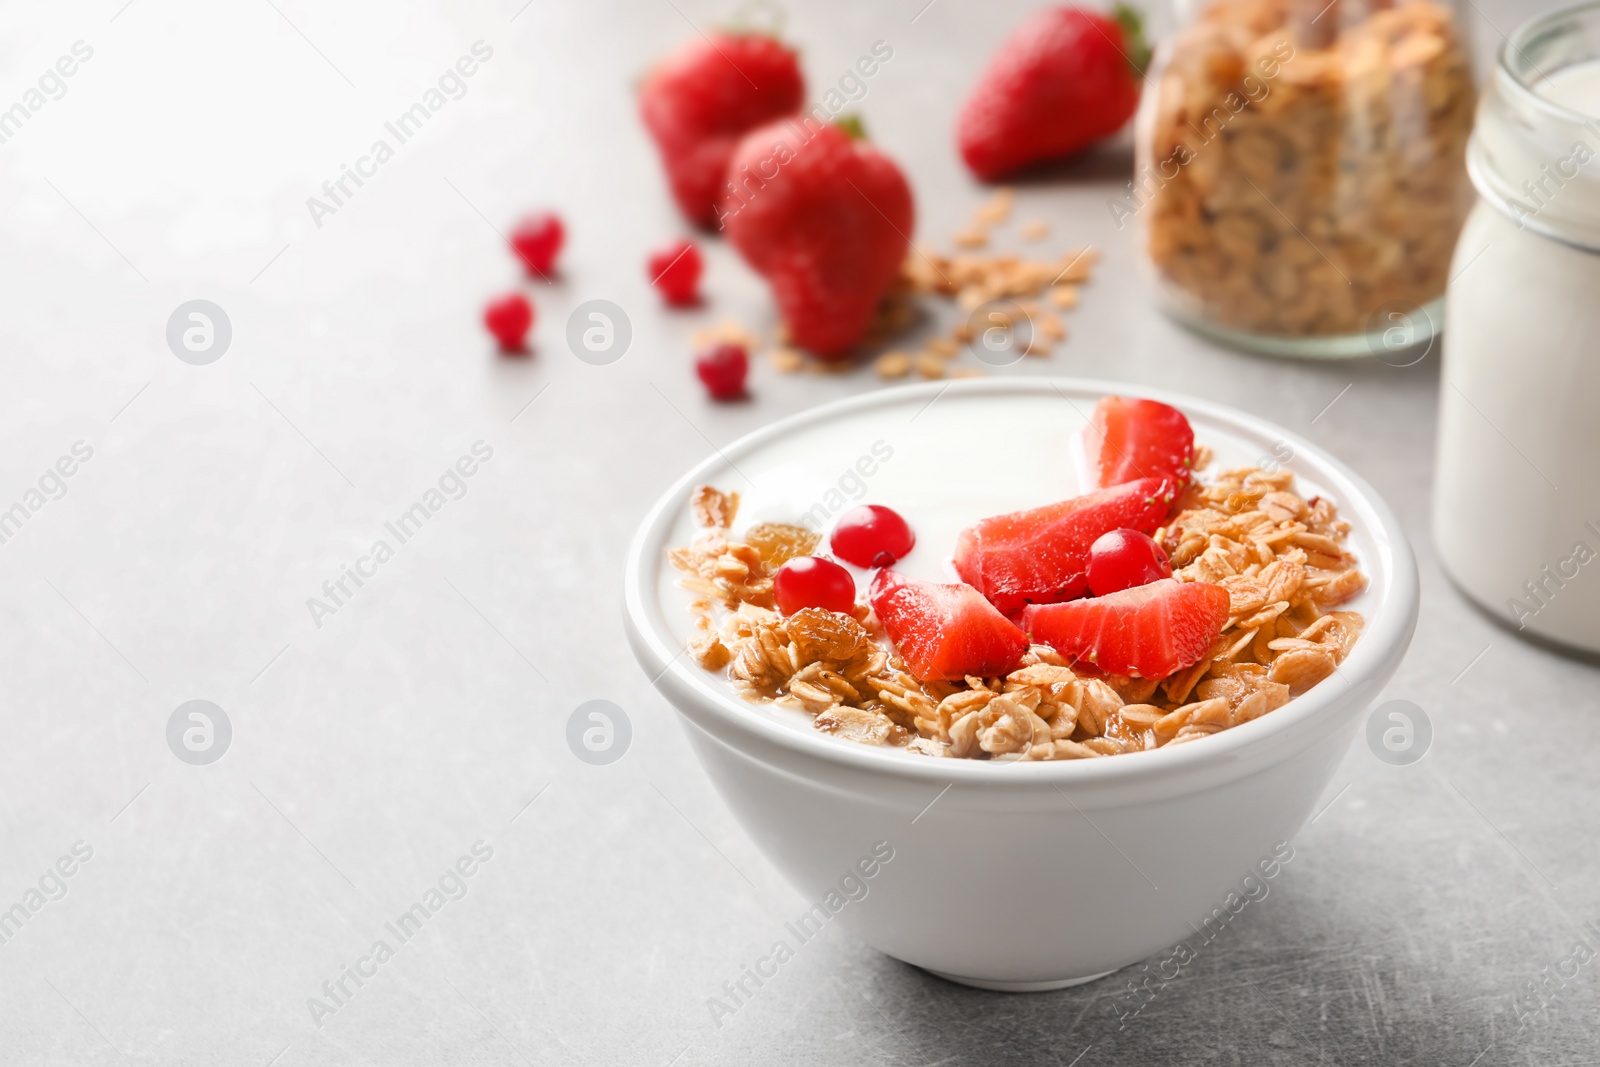 Photo of Bowl with yogurt, berries and granola on table